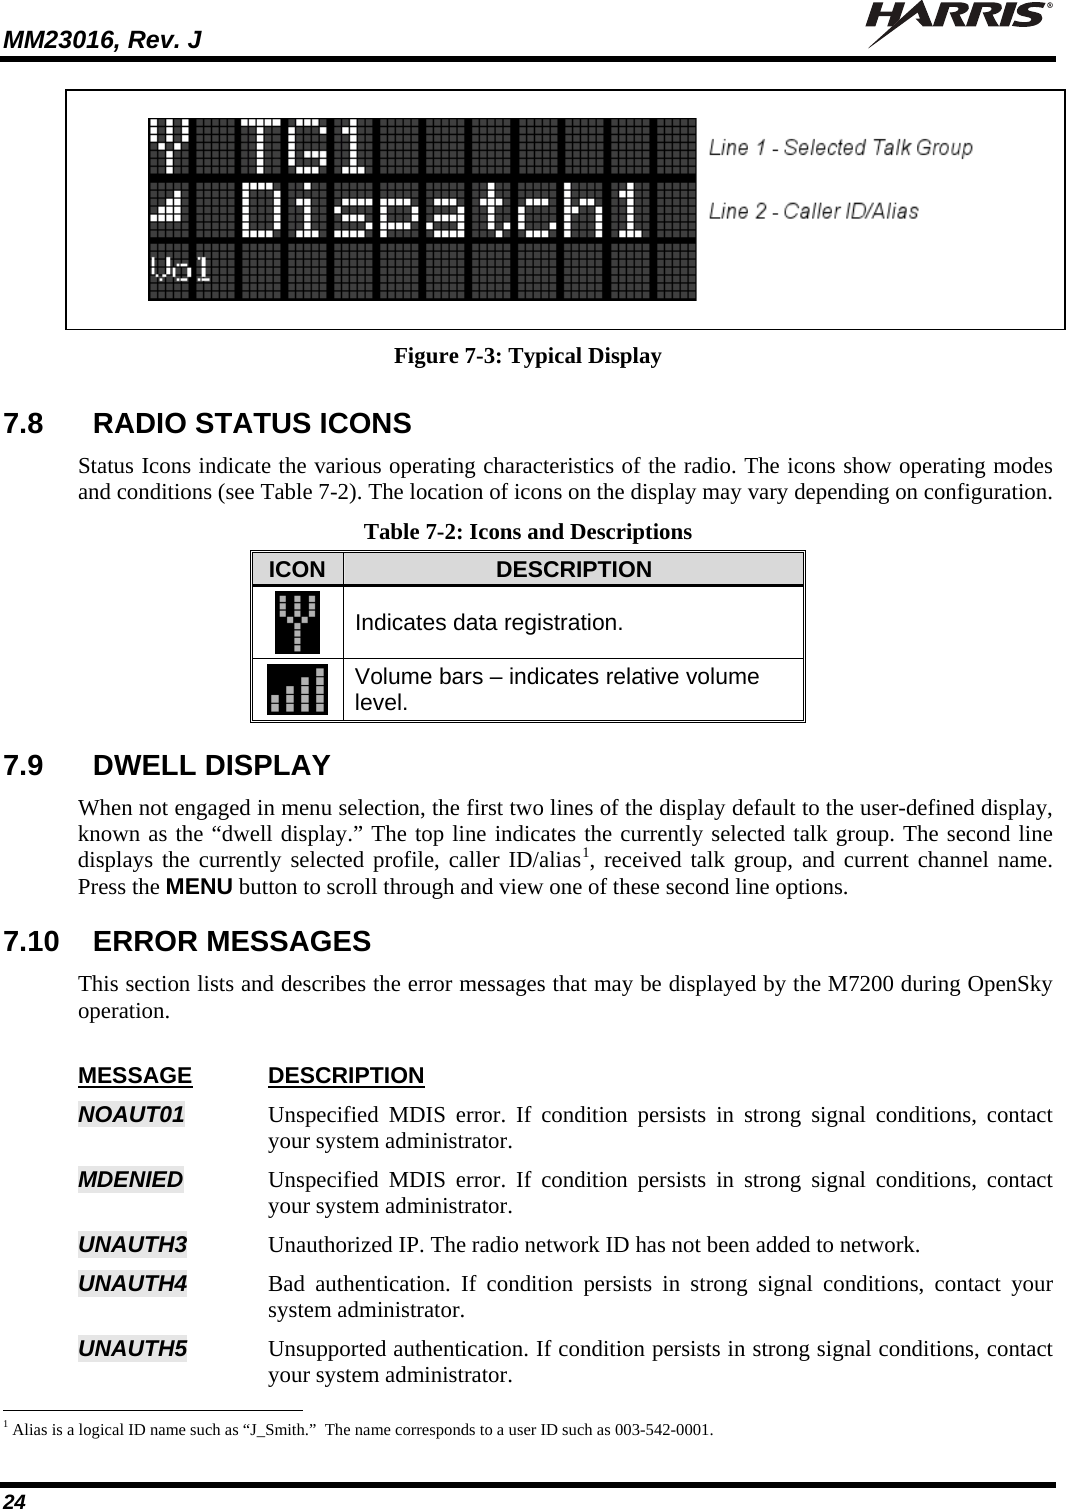 MM23016, Rev. J   24    Figure 7-3: Typical Display 7.8  RADIO STATUS ICONS Status Icons indicate the various operating characteristics of the radio. The icons show operating modes and conditions (see Table 7-2). The location of icons on the display may vary depending on configuration. Table 7-2: Icons and Descriptions ICON  DESCRIPTION  Indicates data registration.  Volume bars – indicates relative volume level. 7.9  DWELL DISPLAY When not engaged in menu selection, the first two lines of the display default to the user-defined display, known as the “dwell display.” The top line indicates the currently selected talk group. The second line displays the currently selected profile, caller ID/alias1, received talk group, and current channel name. Press the MENU button to scroll through and view one of these second line options.  7.10  ERROR MESSAGES This section lists and describes the error messages that may be displayed by the M7200 during OpenSky operation.  MESSAGE DESCRIPTION NOAUT01  Unspecified MDIS error. If condition persists in strong signal conditions, contact your system administrator. MDENIED   Unspecified MDIS error. If condition persists in strong signal conditions, contact your system administrator. UNAUTH3  Unauthorized IP. The radio network ID has not been added to network. UNAUTH4  Bad authentication. If condition persists in strong signal conditions, contact your system administrator. UNAUTH5  Unsupported authentication. If condition persists in strong signal conditions, contact your system administrator.                                                            1 Alias is a logical ID name such as “J_Smith.”  The name corresponds to a user ID such as 003-542-0001. 